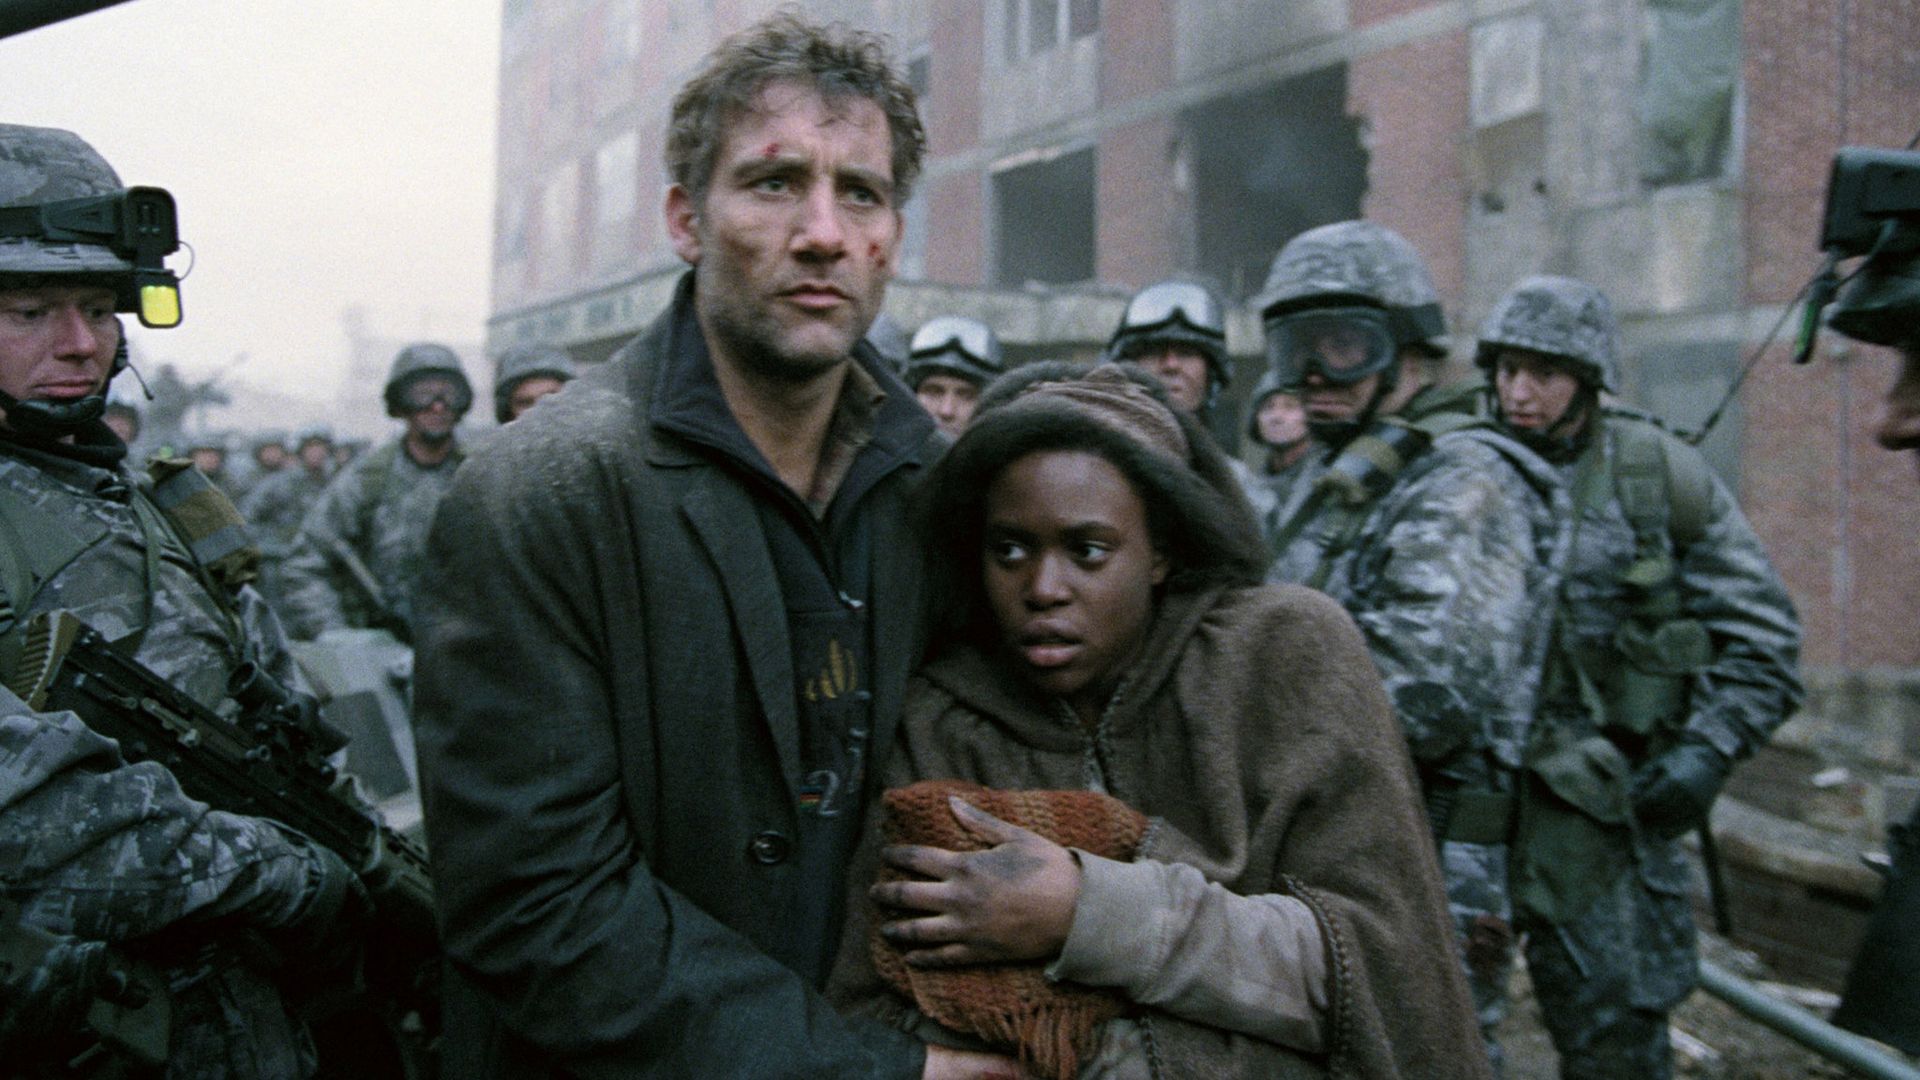 Clive Owen and Clare Hope-Ashitey in Children of Men